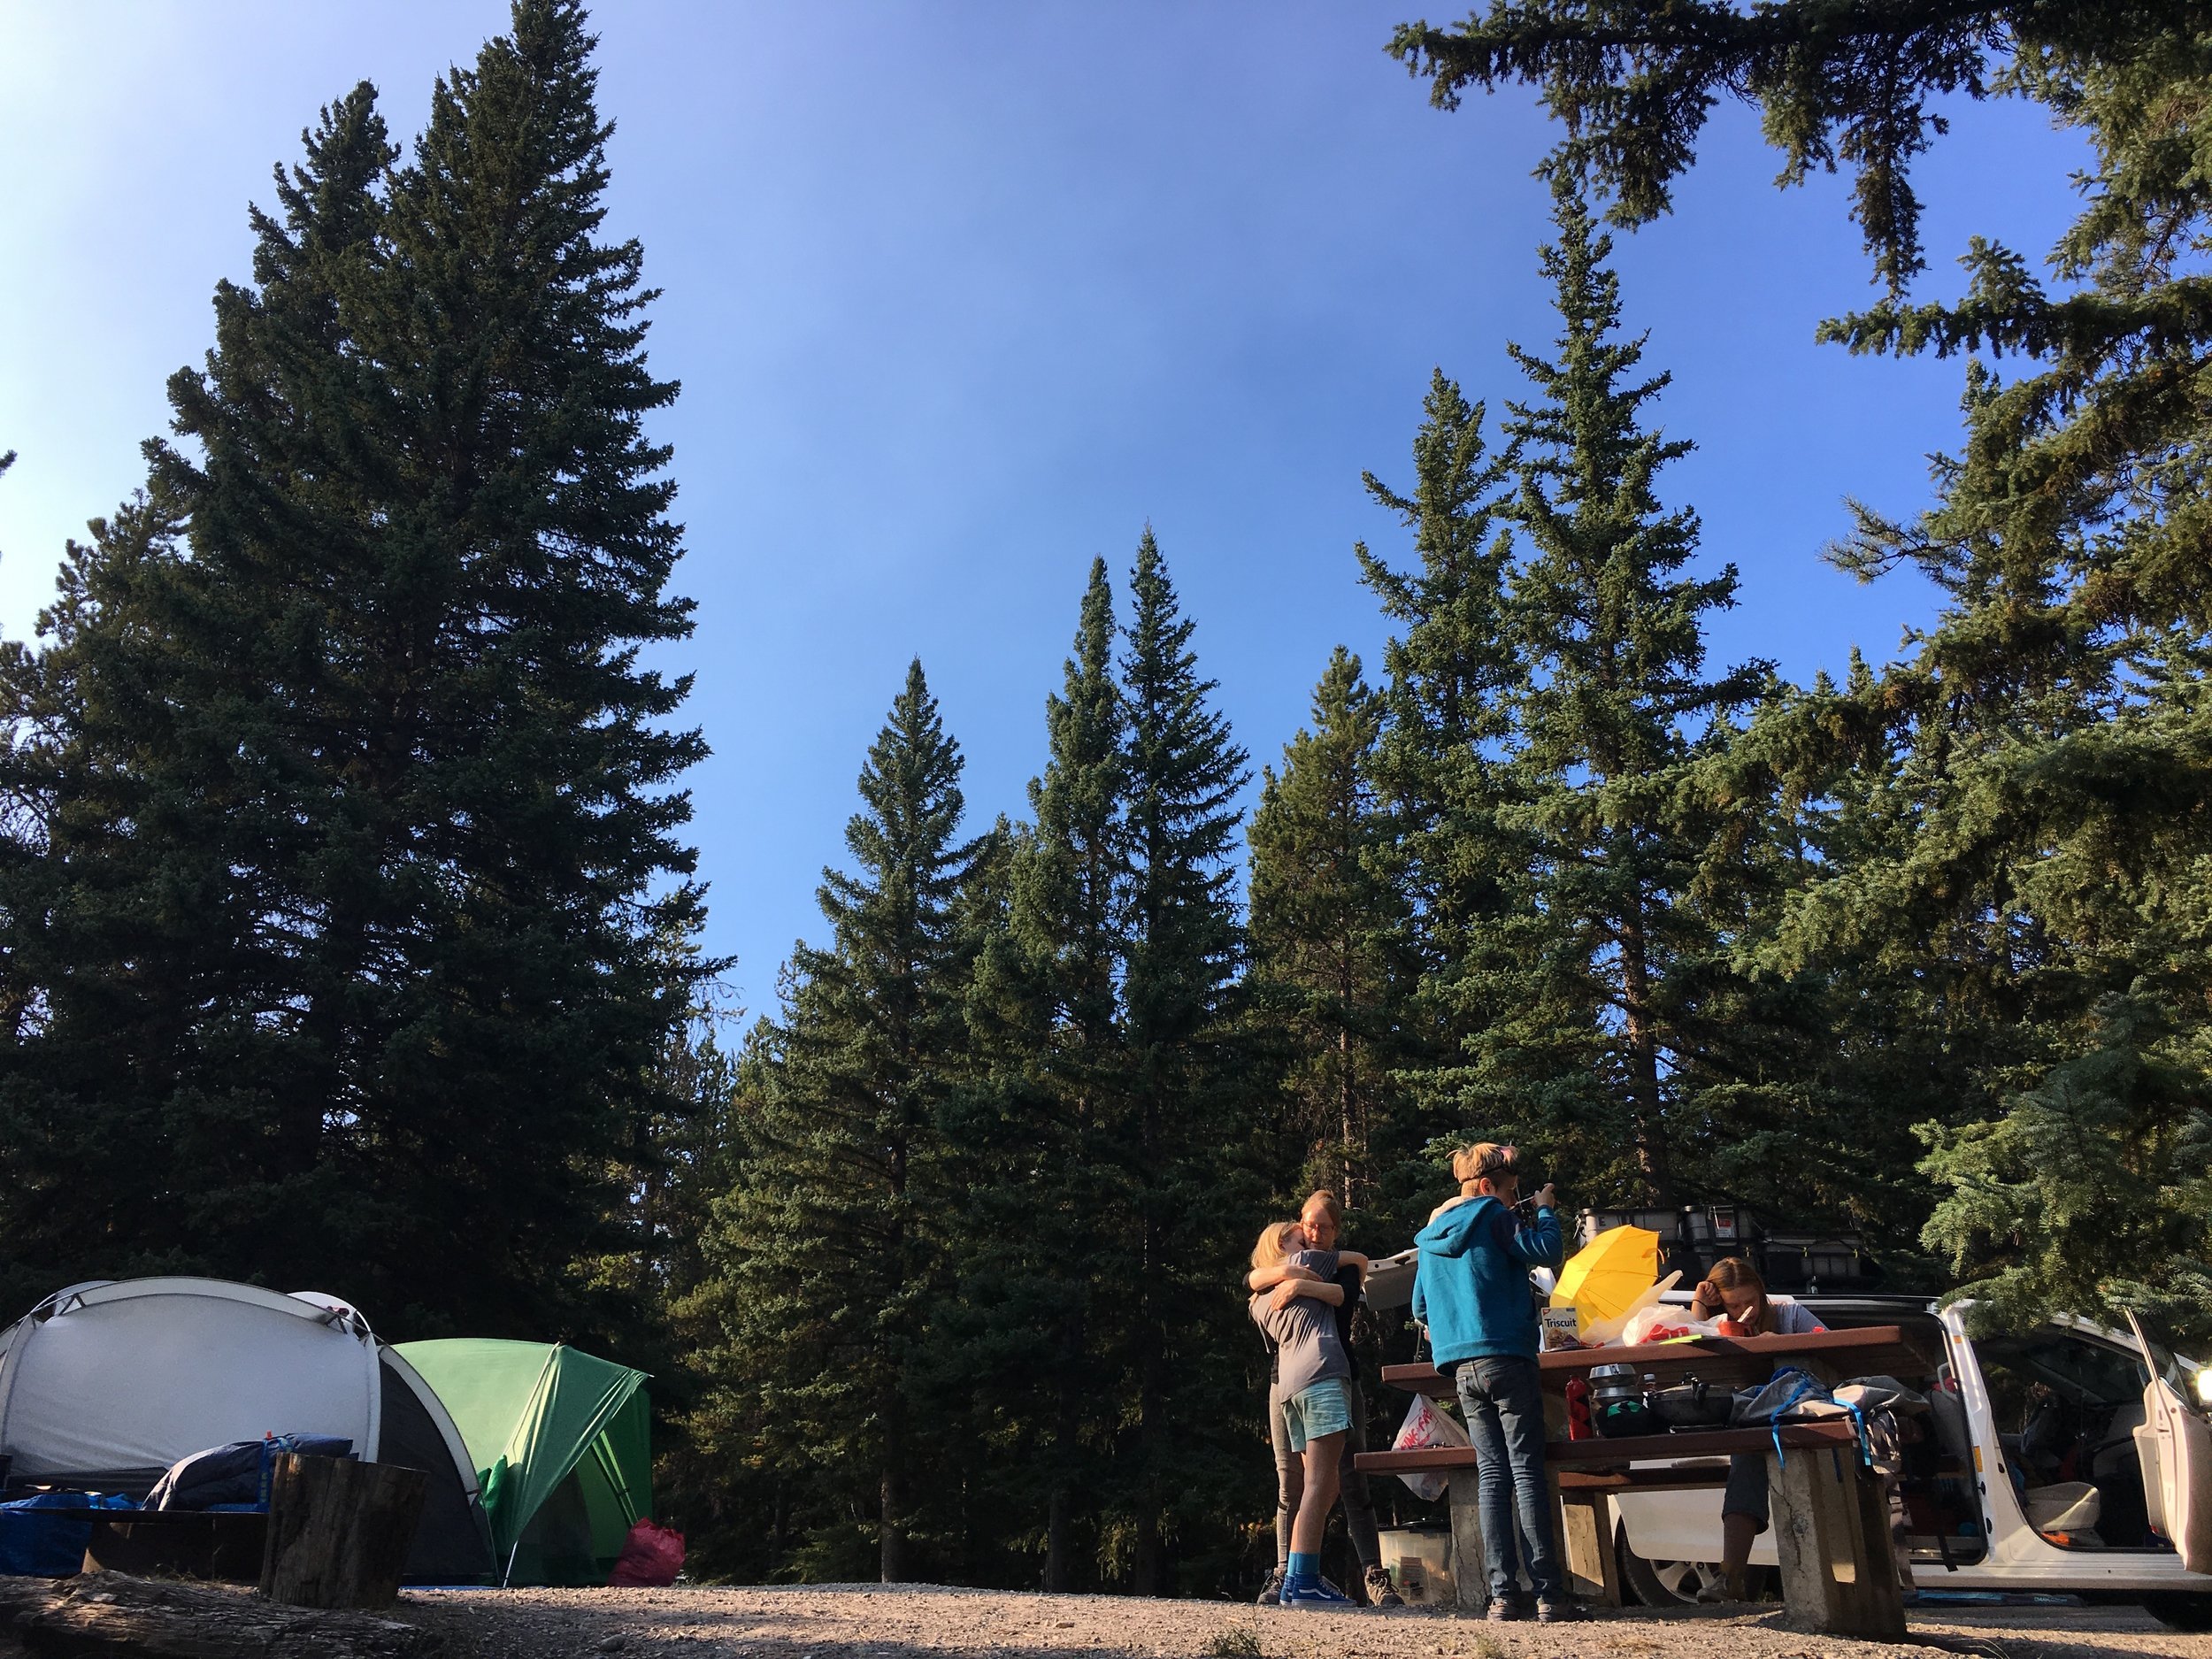  Our campsite in Banff 